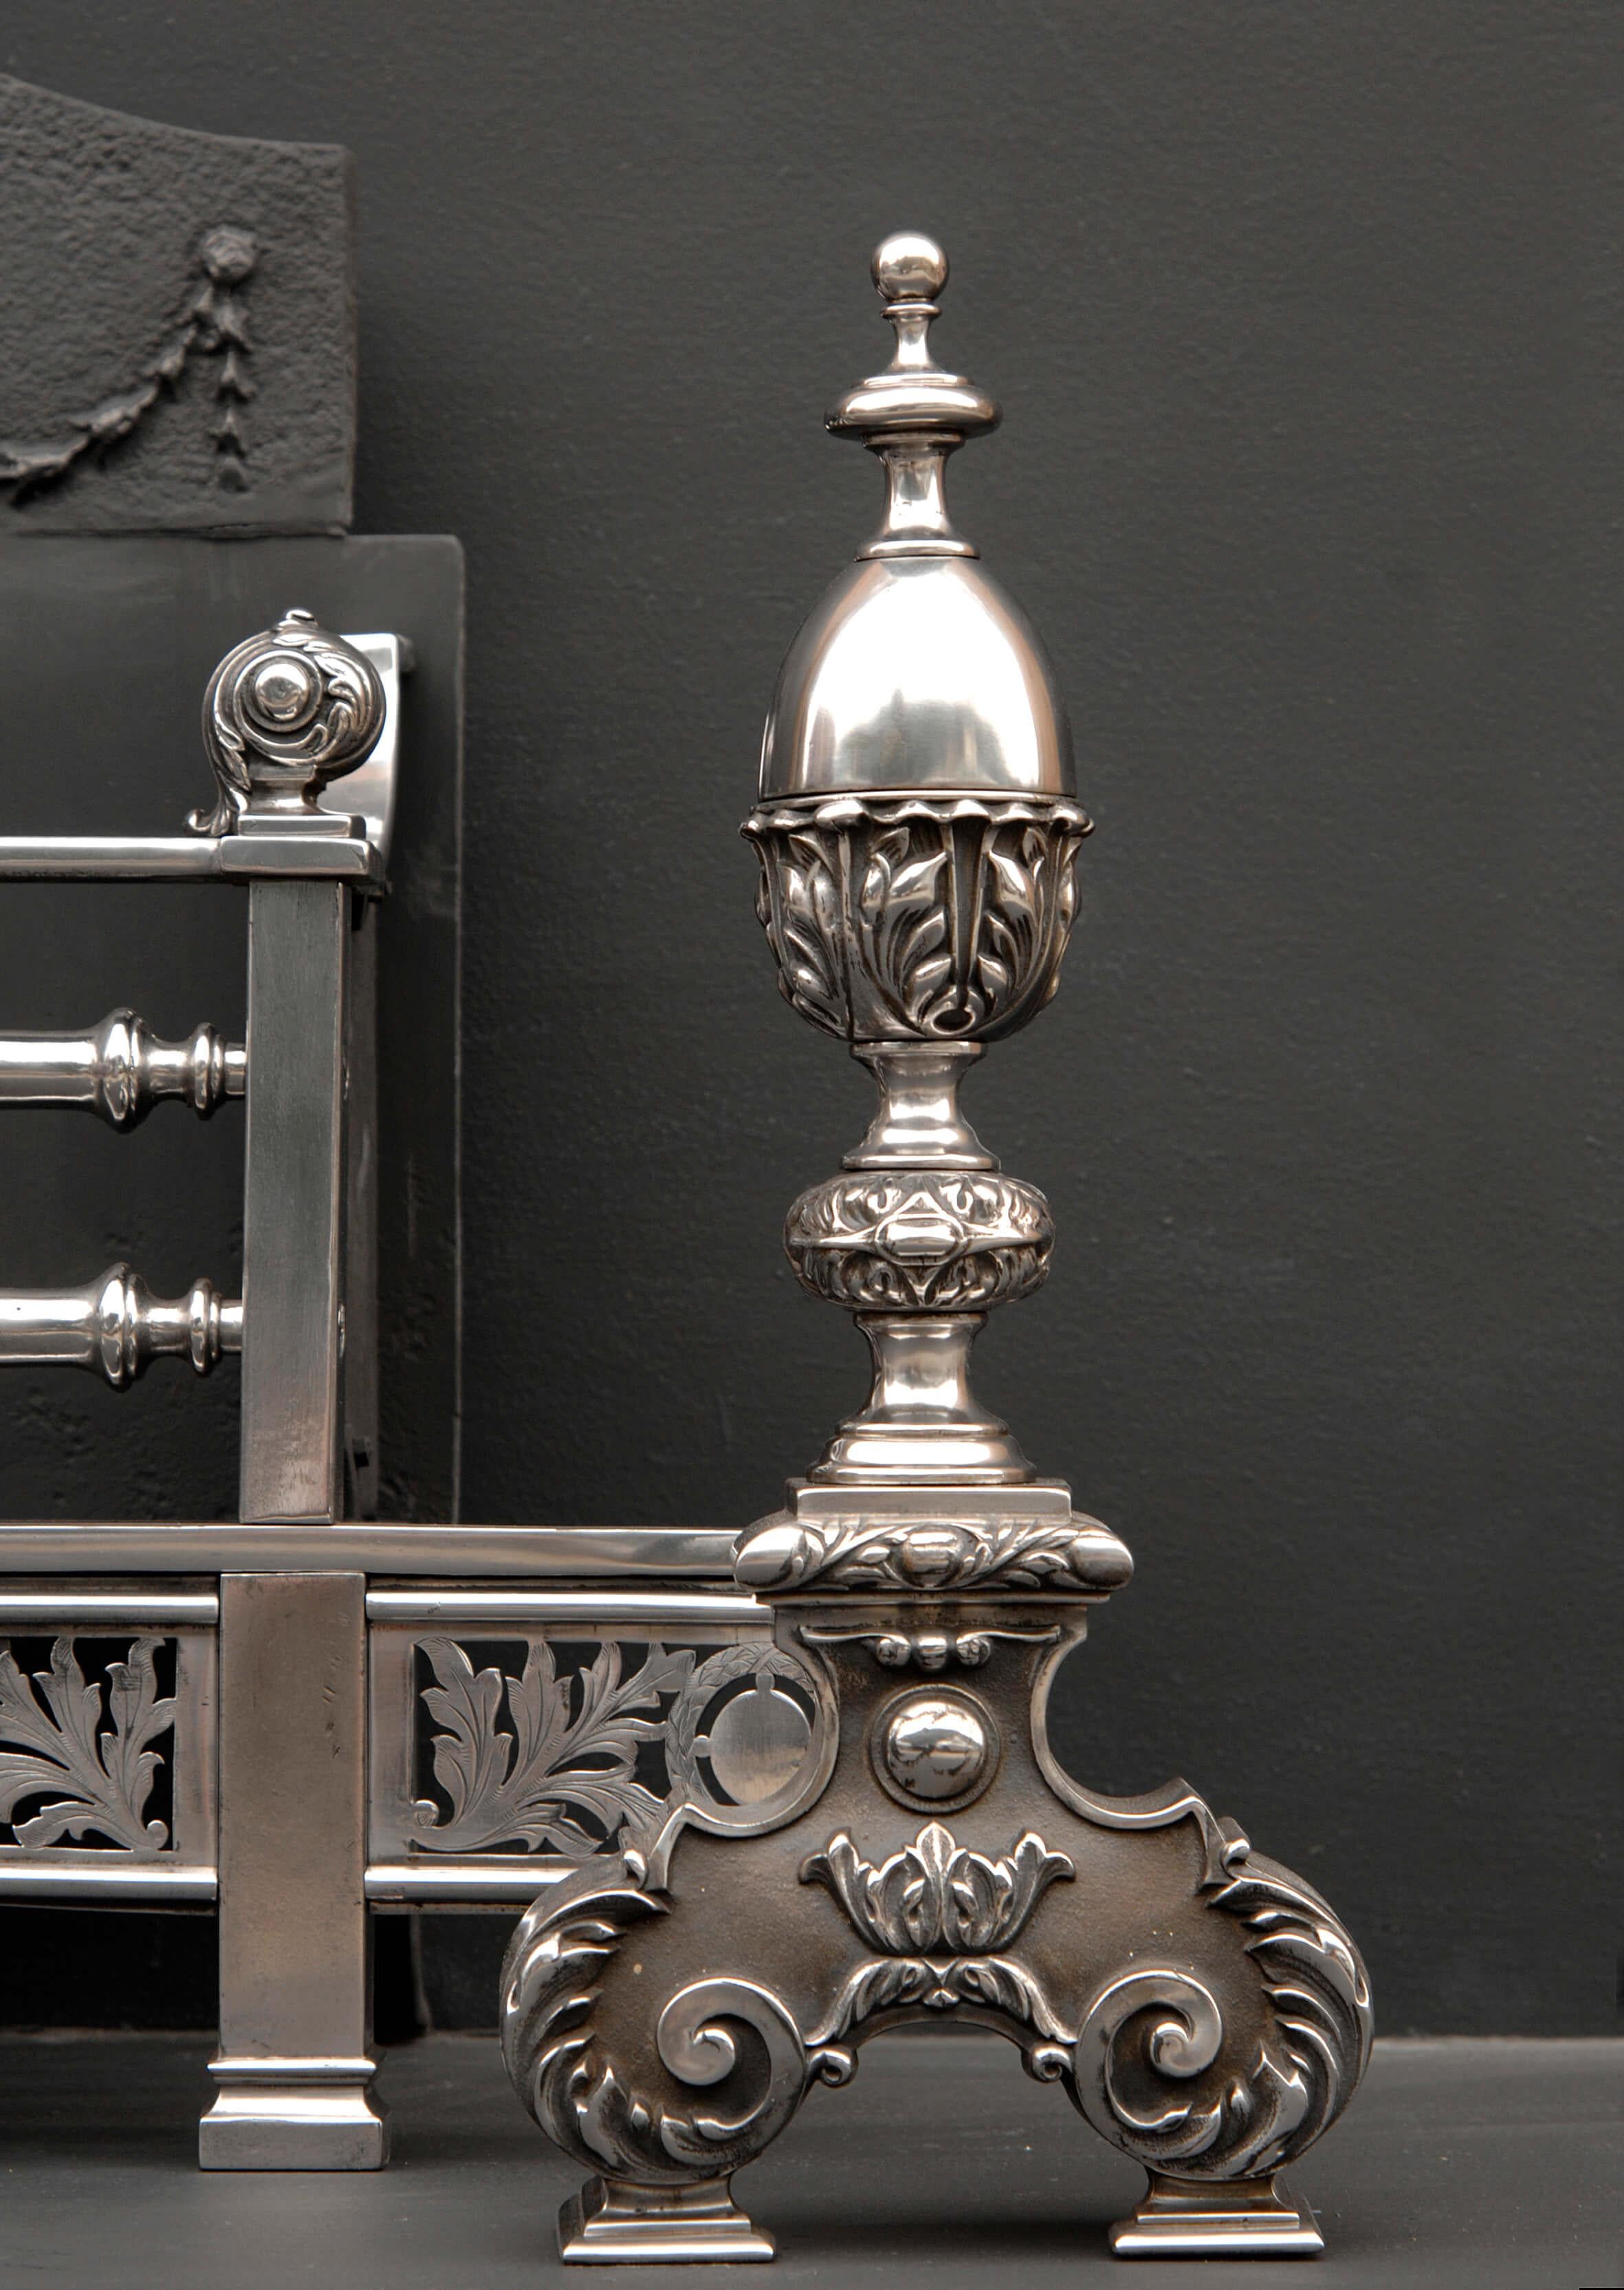 A fine quality 19th century English George III style steel firegrate, with engraved leafwork fret, the dogs with scrolled and leaf cast bases, surmounted by finely cast acanthus leaf finials. Urn and swag cast fireback.

Measures; Width at front: